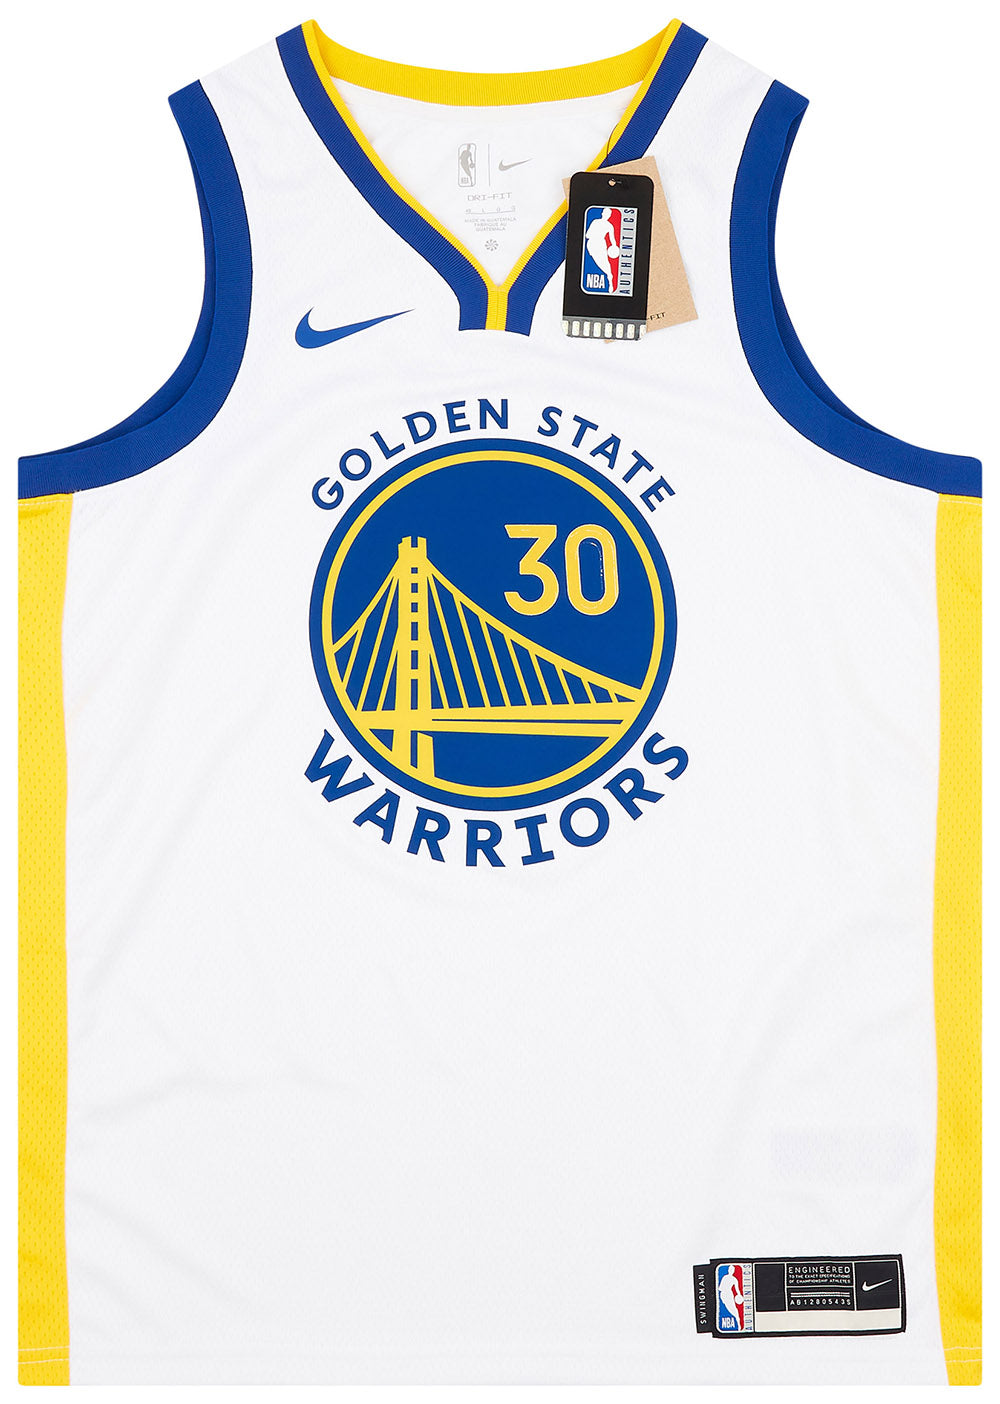 STEPH CURRY #30 GOLDEN STATE WARRIORS SWINGMAN LARGE 50 JERSEY